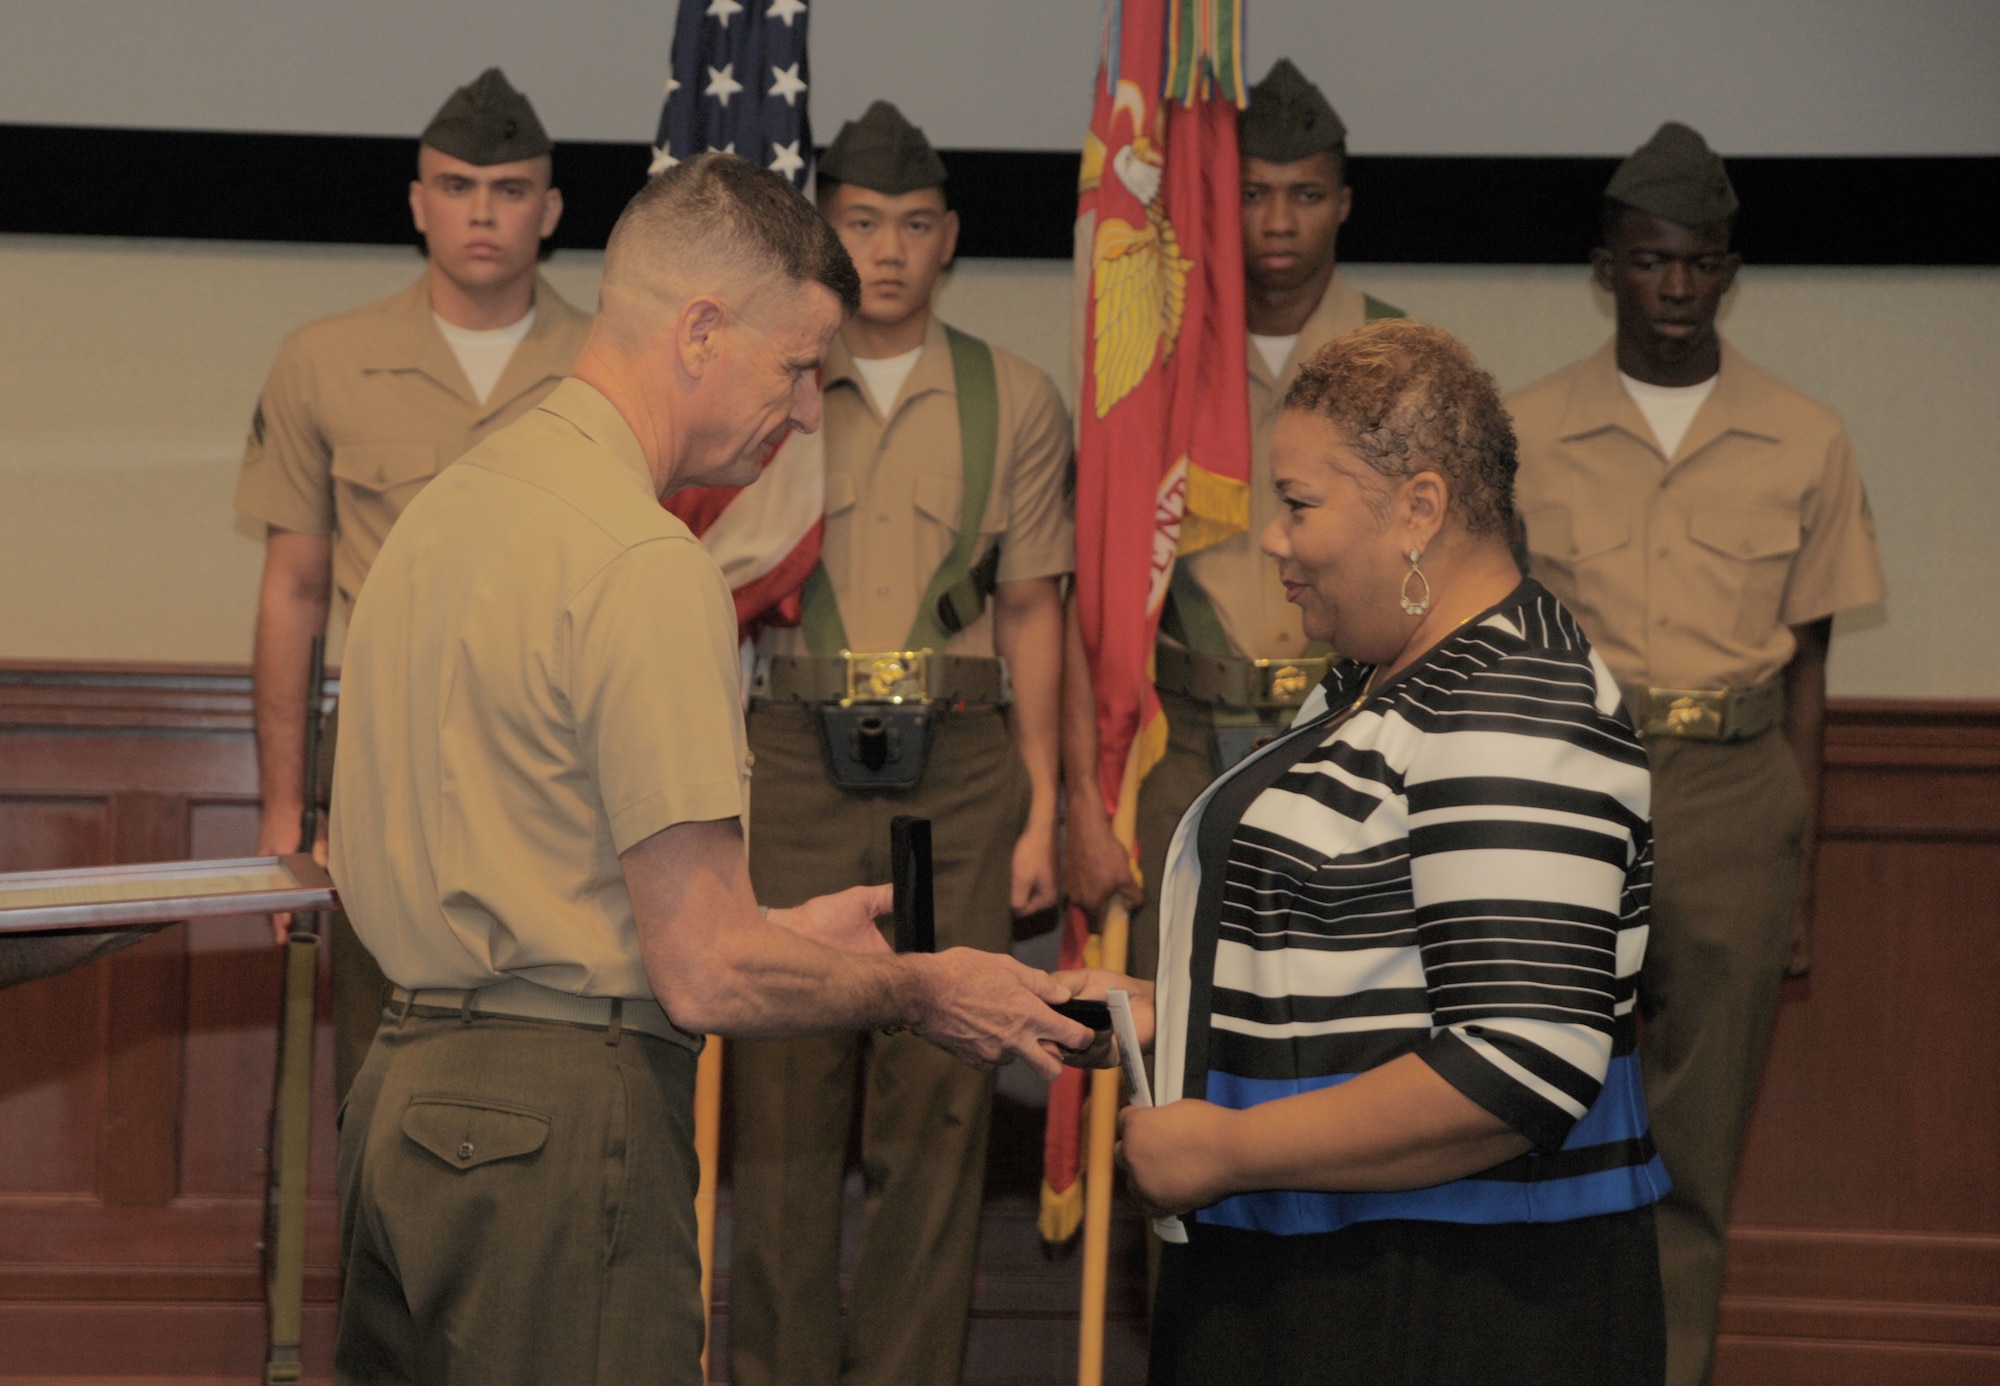 Kim Fountaine, right, accepts a posthumously awarded Congressional Gold Medal on behalf of her father, U.S. Marine Corps Pfc. Charles Robert Fountain, from Lt. Gen. William D. Beydler, commander of U.S. Marine Forces Central Command, at MacDill Air Force Base, Fla., Jan. 27, 2017. Fountain served during World War II and was a Montford Point Marine, a group of Marines who made history by volunteering to serve in a then segregated Marine Corps. (U.S. Air Force photo by Airman 1st Class Adam R. Shanks)